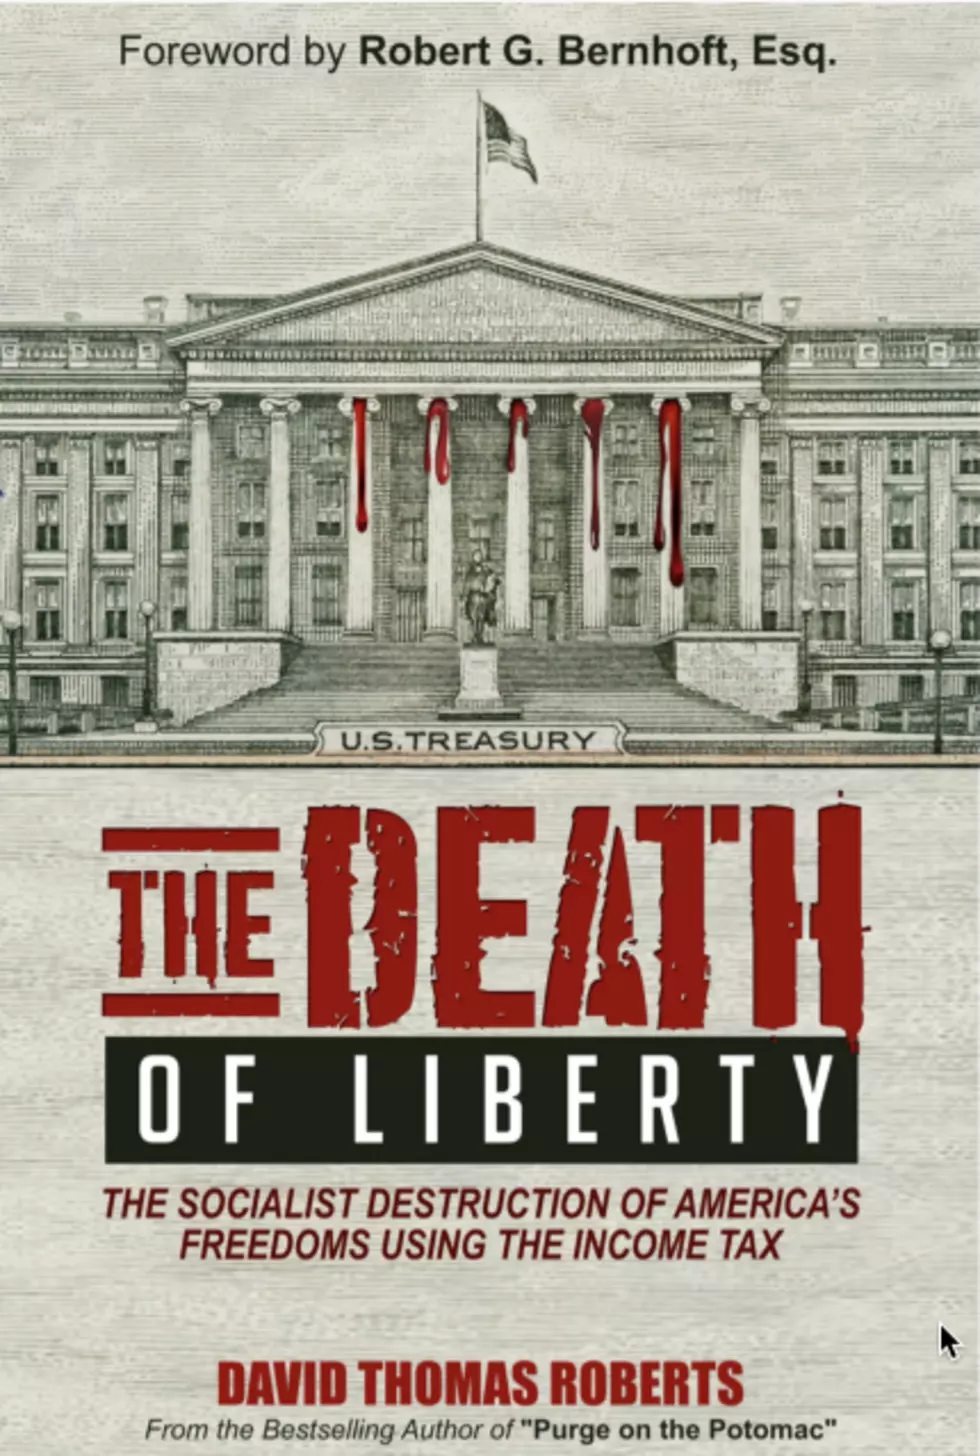 David Thomas Roberts,NEW BOOK: The Death of Liberty, The Socialist Destruction of America’s Freedoms using the Income Tax